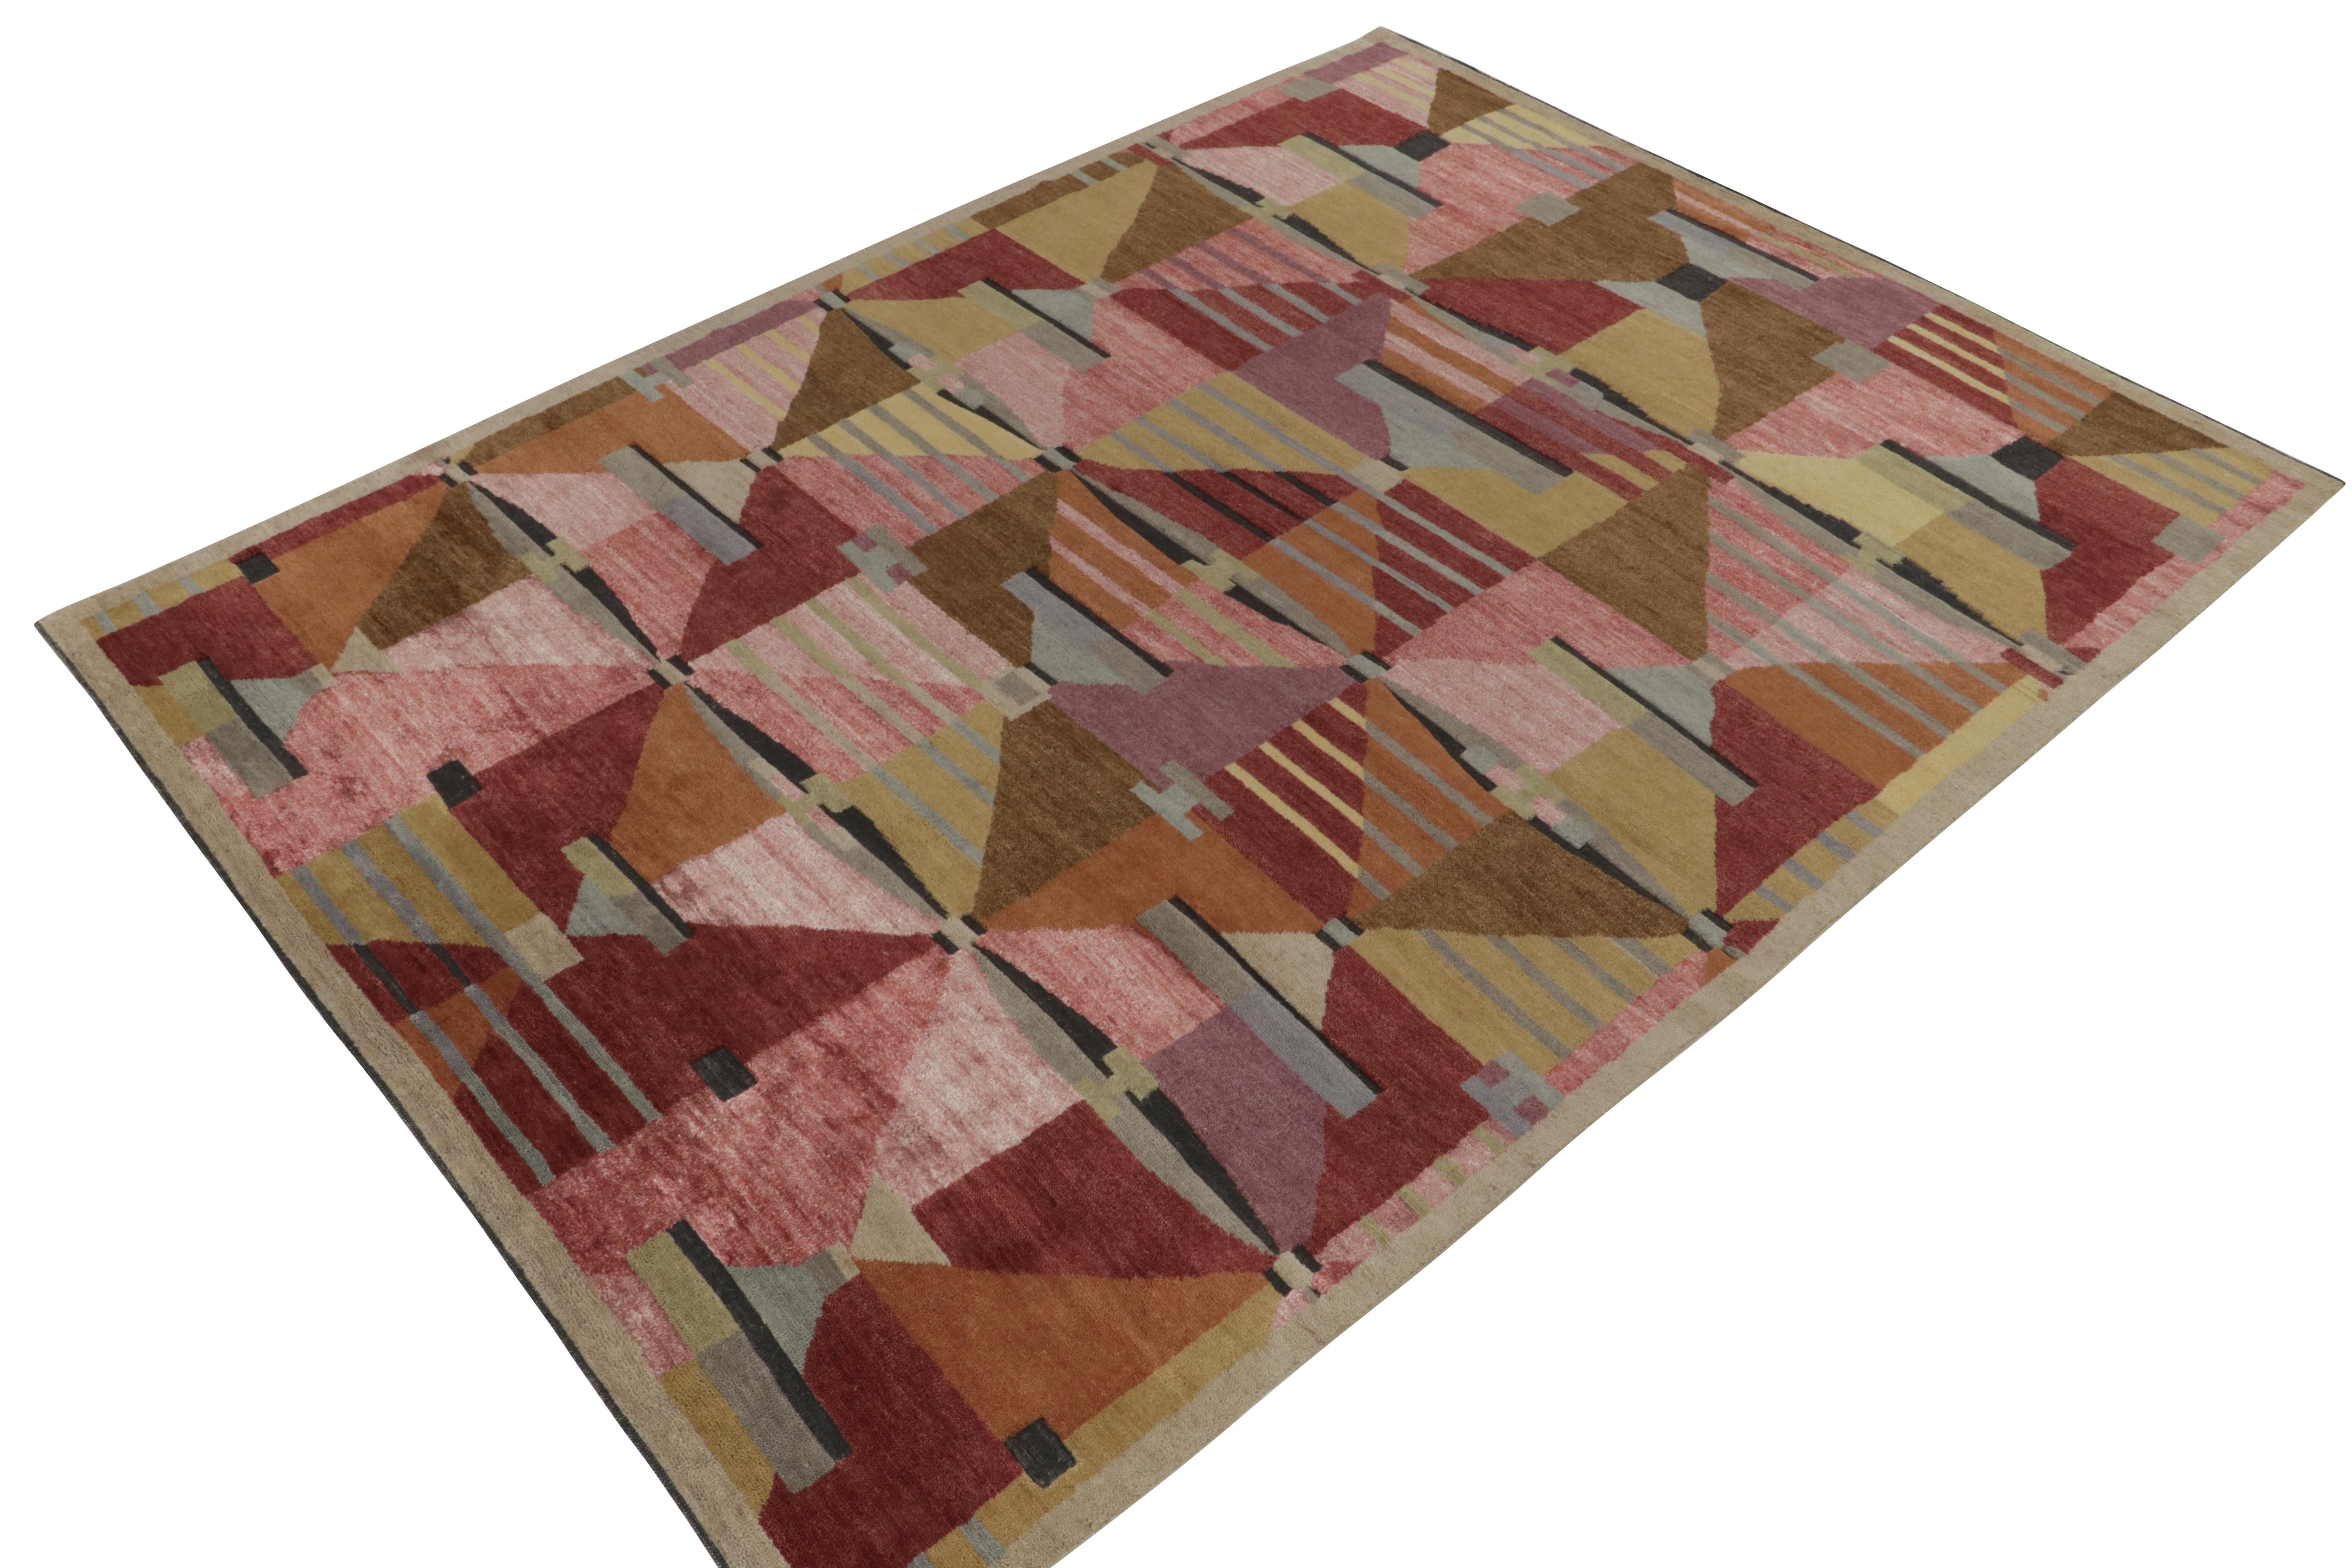 Hand-knotted in wool, a 9x12 ode to Swedish Deco rug styles, from Rug & Kilim’s exciting new Deco Collection. 

On the design: Inspired by Scandinavian works of the mid 20th century, a brilliant spectrum of pinks, reds, browns and golds create